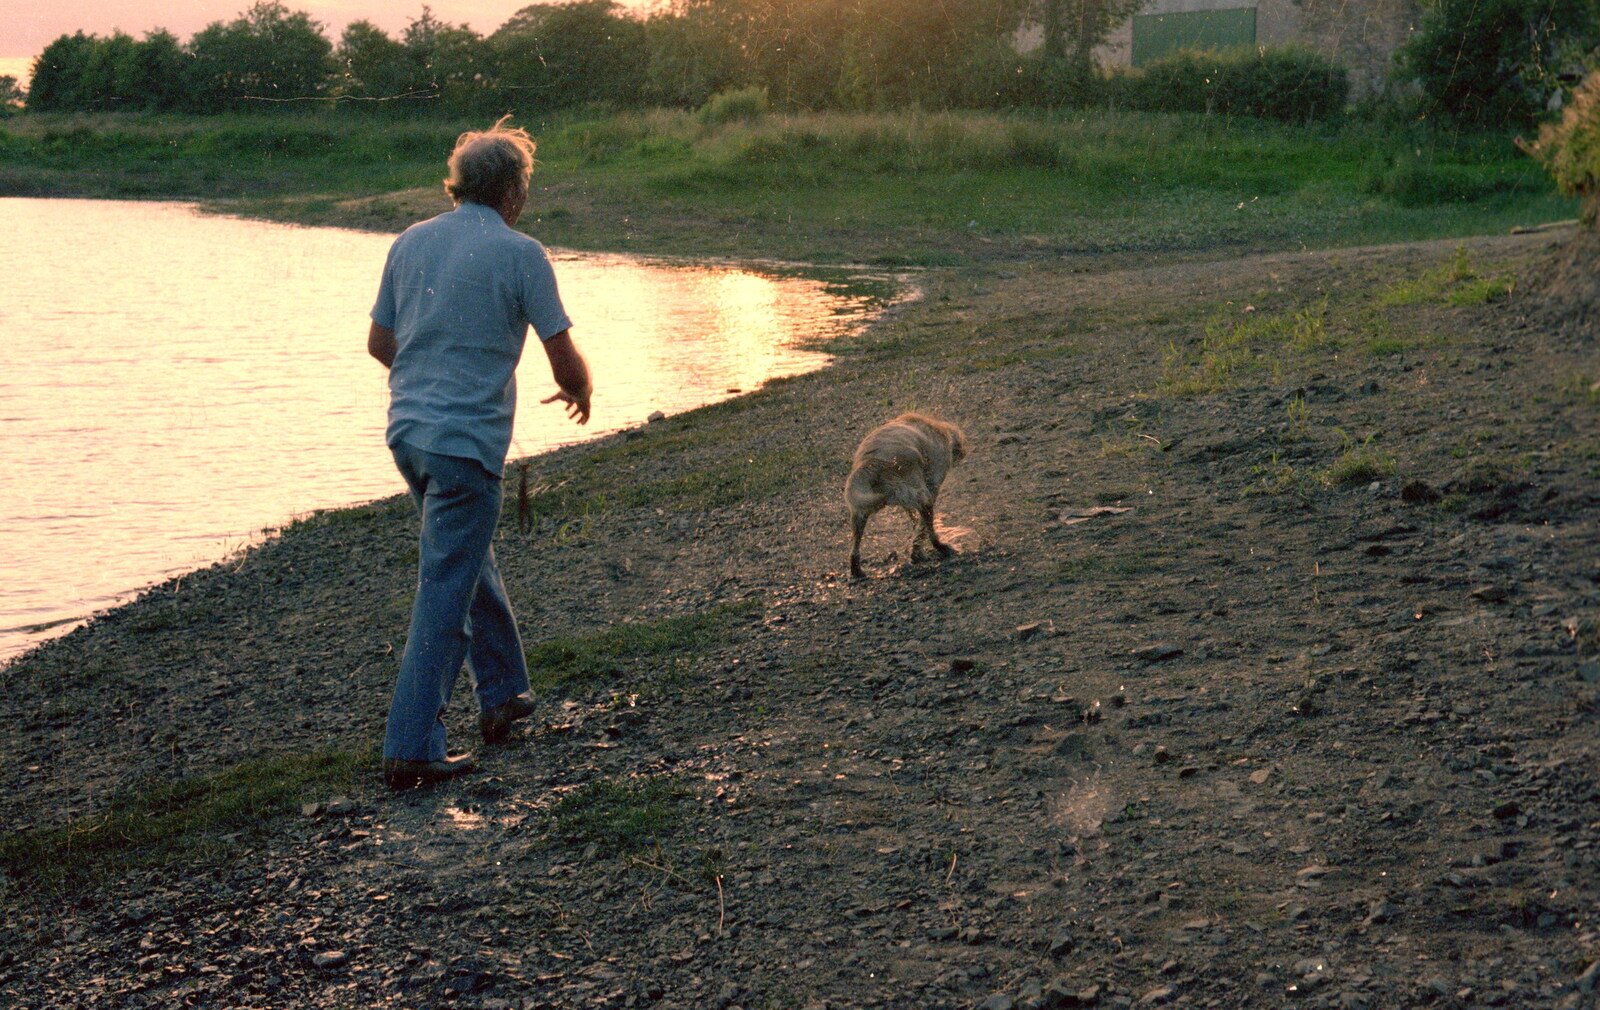 The Old Chap takes Brandy for a walk from Nosher Goes Windsurfing, Macclesfield, Cheshire - 20th June 1985